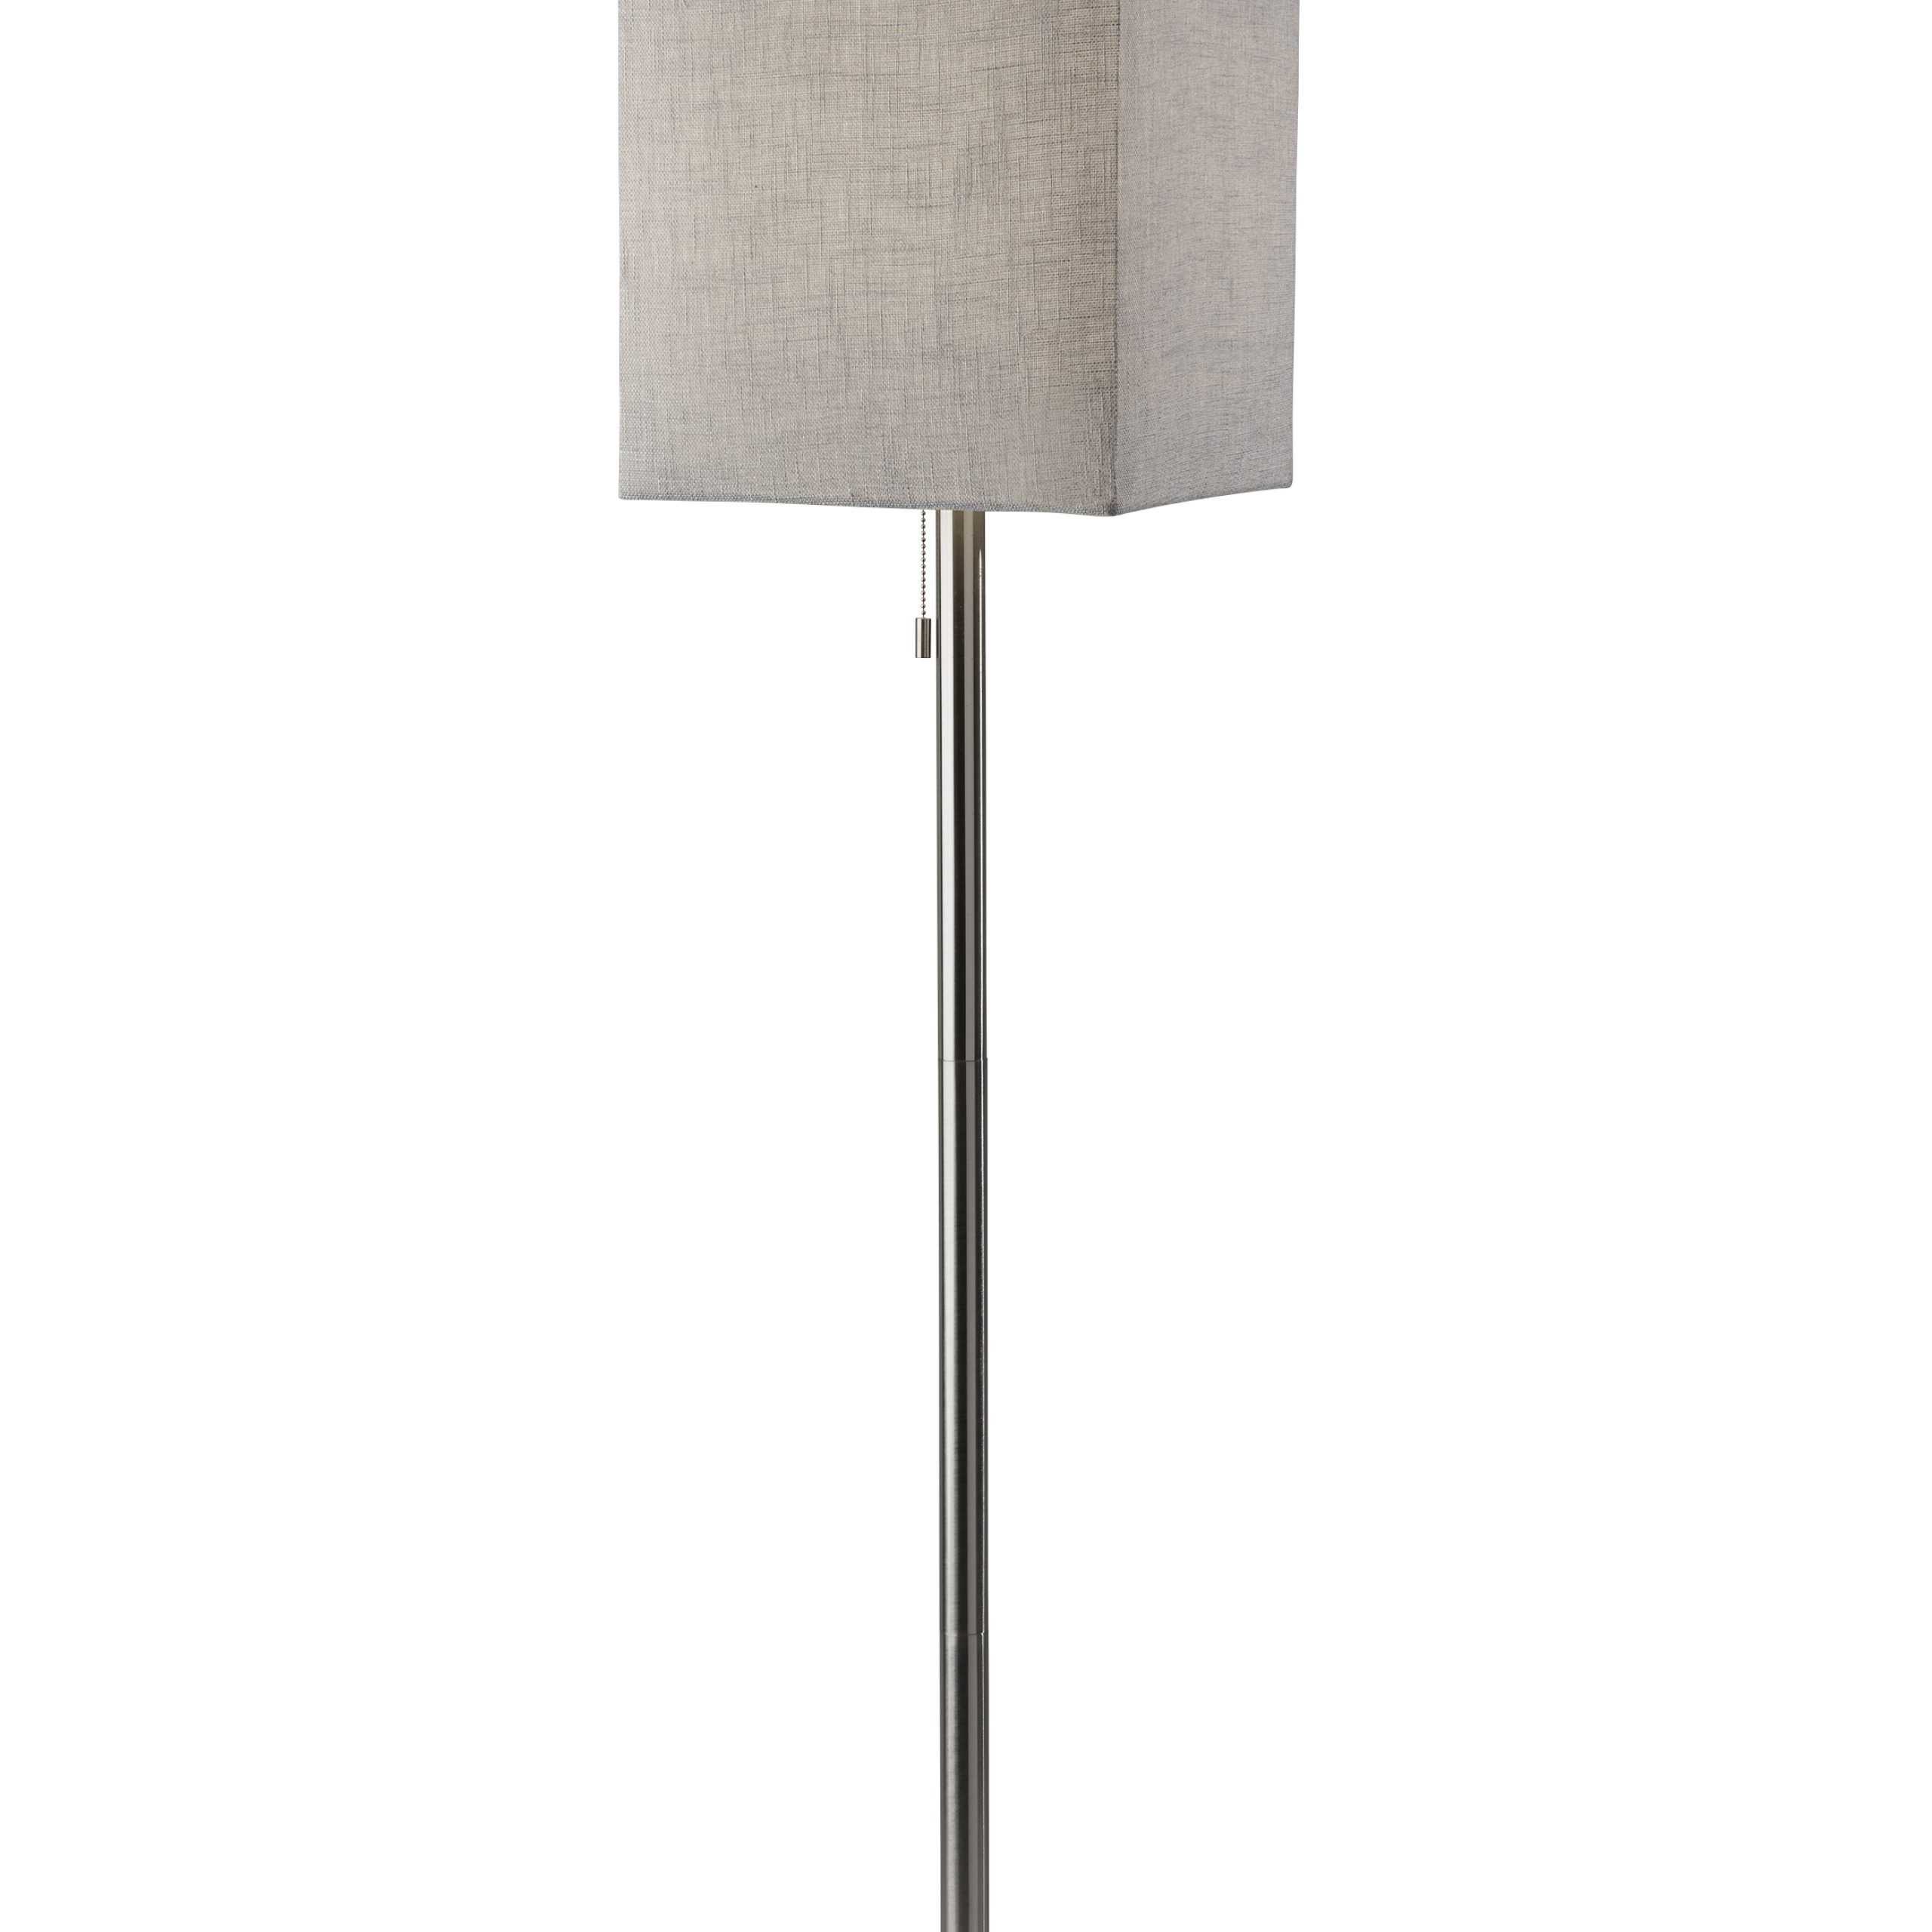 Adesso Estelle Floor Lamp, Brushed Steel, Light Grey Textured Fabric Shade  – Walmart Throughout Grey Textured Floor Lamps (Photo 2 of 15)